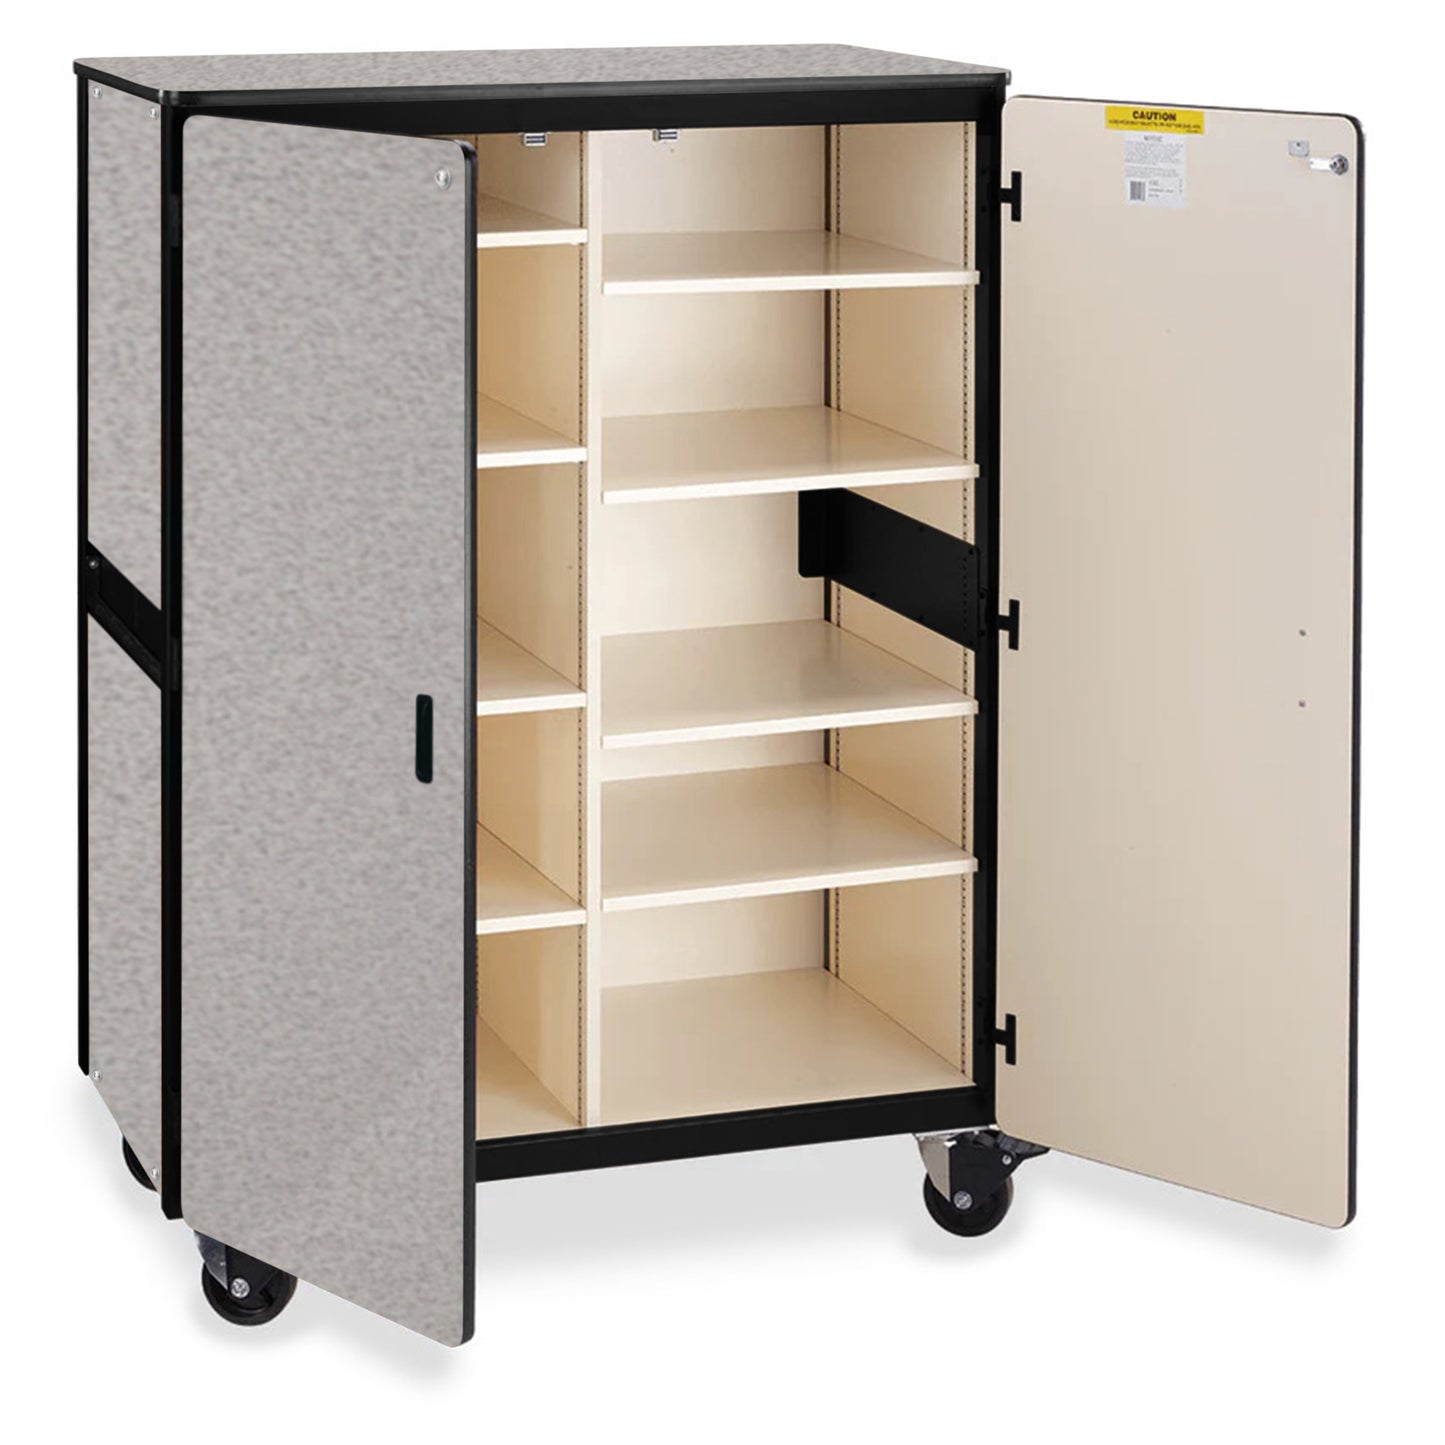 Virco 2502 - Mobile Storage Cabinet With Eight Shelves - 48"W x 28"D x 66"H (Virco 2502)